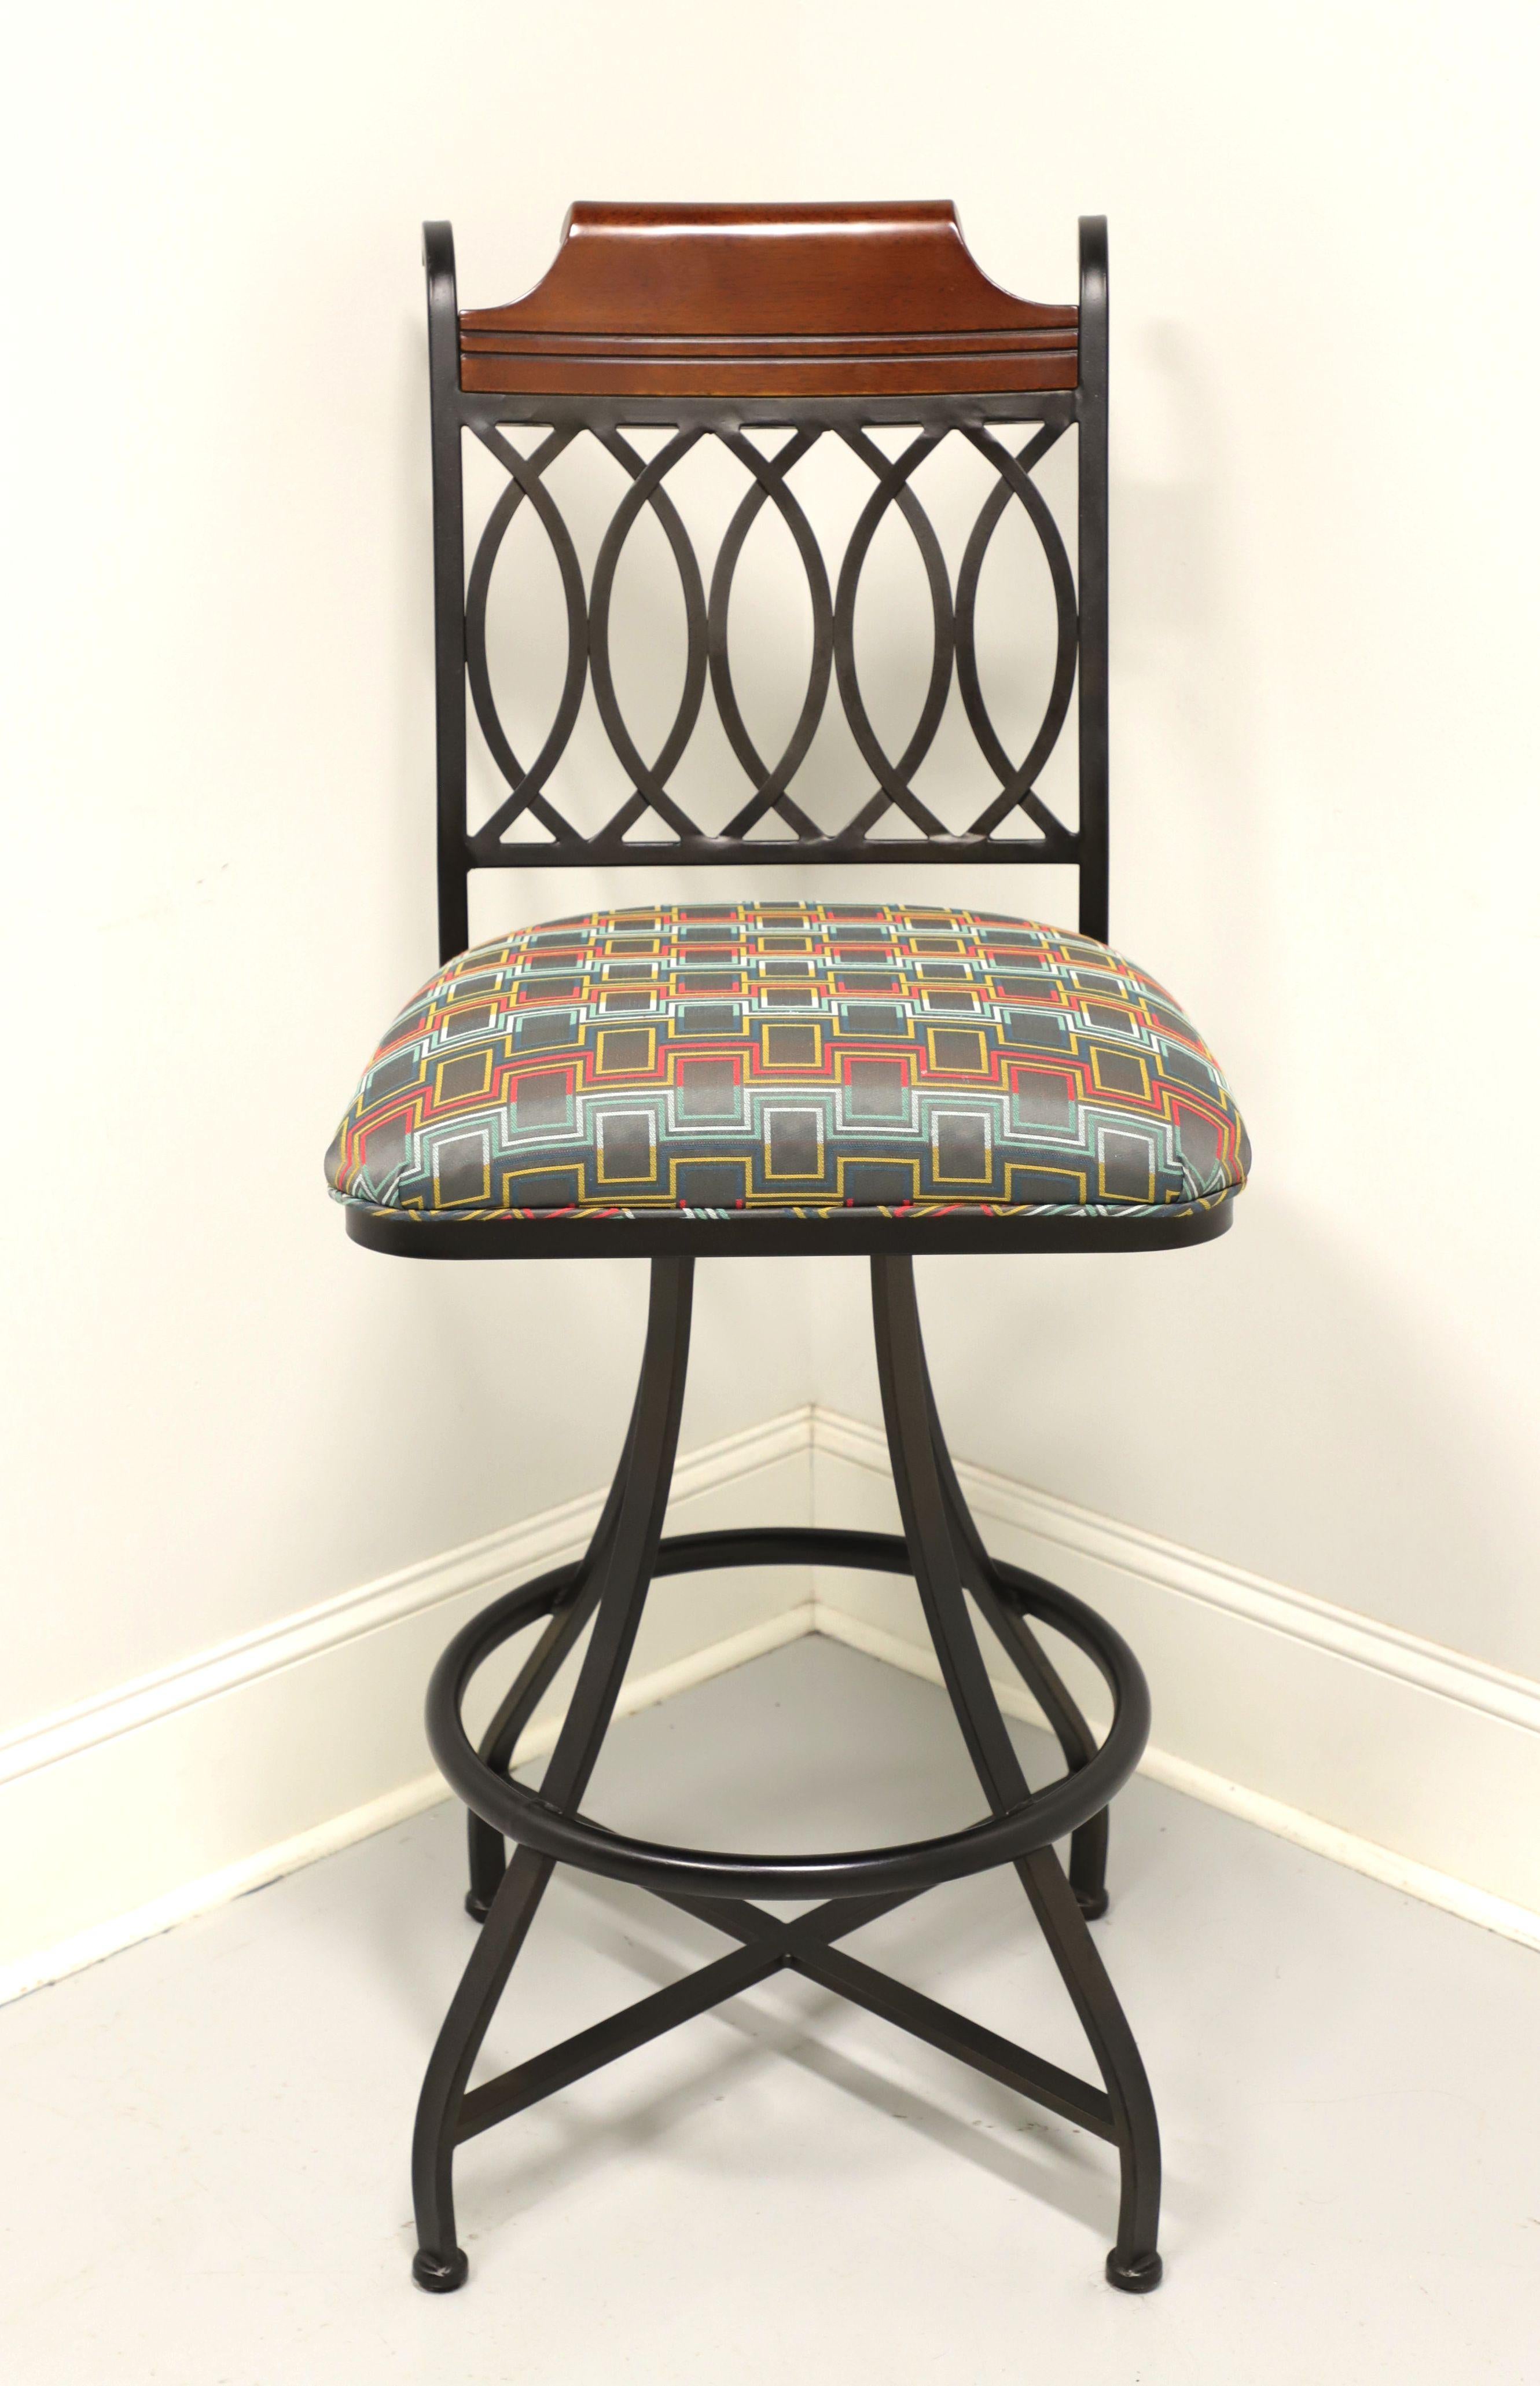 A Transitional style bar-height barstool, unbranded. Black metal frame, decorative wood crestrail, open weave metal backrest, 360 degree swivel mechanism, geometric pattern fabric upholstered seat and metal surround footrest. Likely made in the USA,